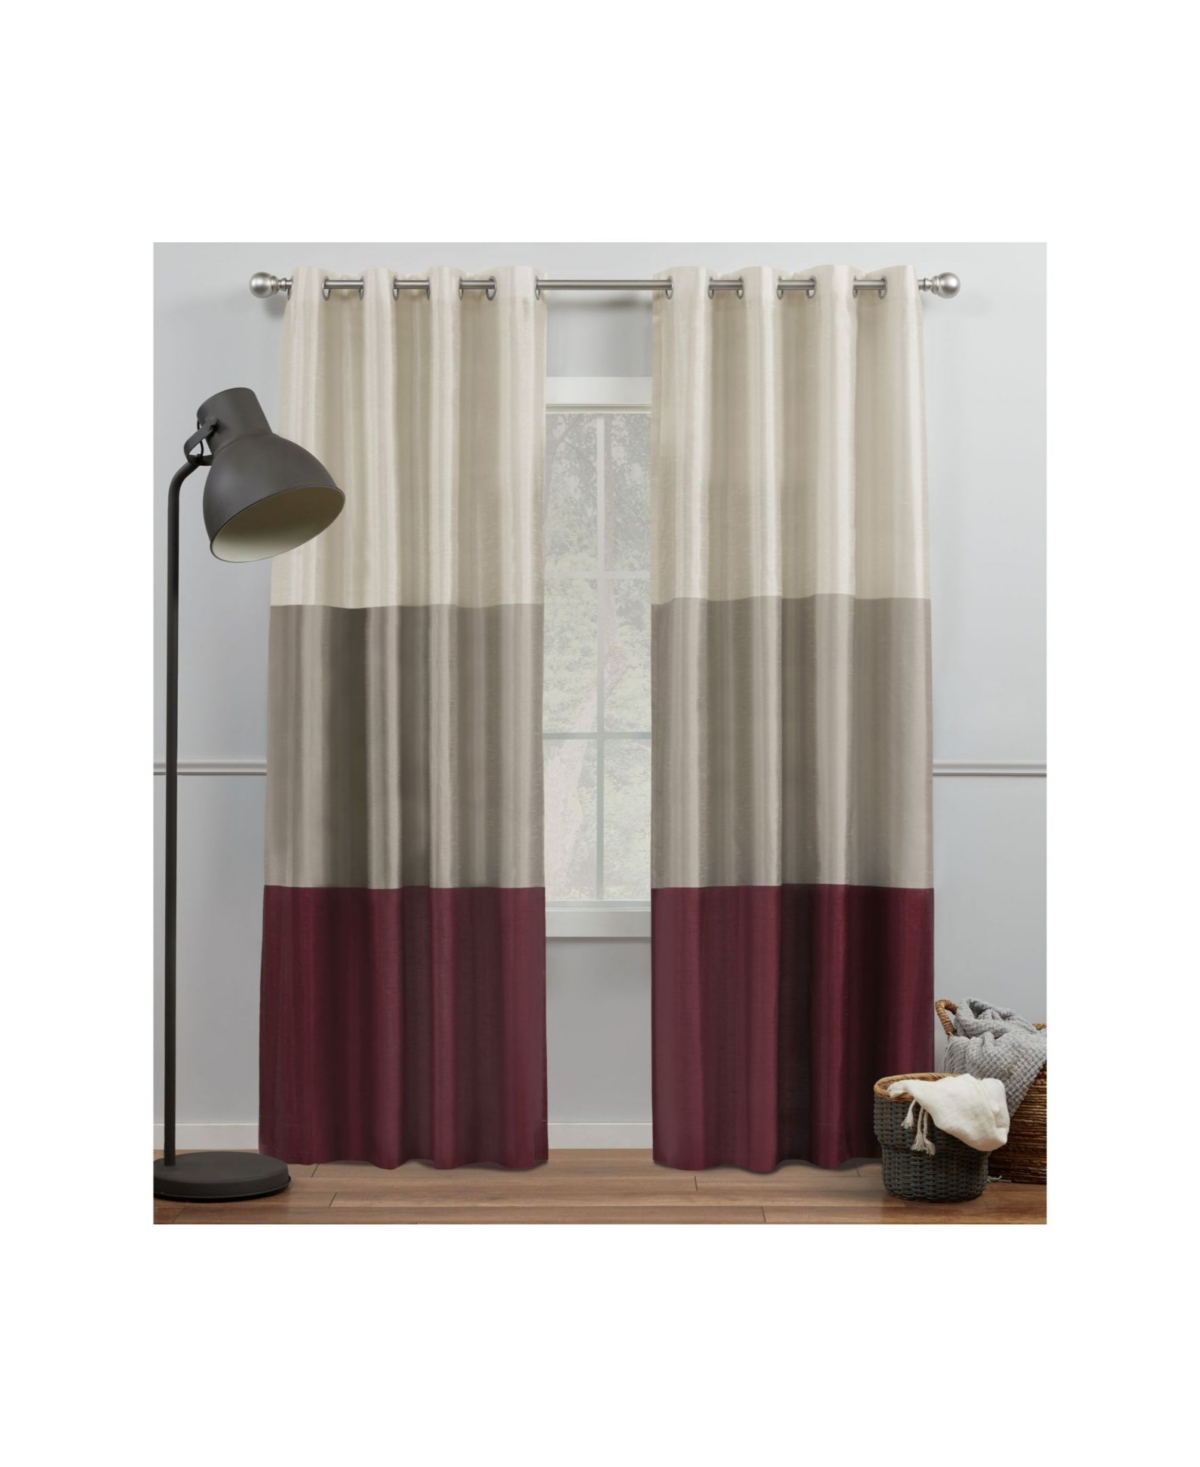 Curtains Chateau Striped Grommet Top Curtain Panel Pair, 54" x 108" - Red